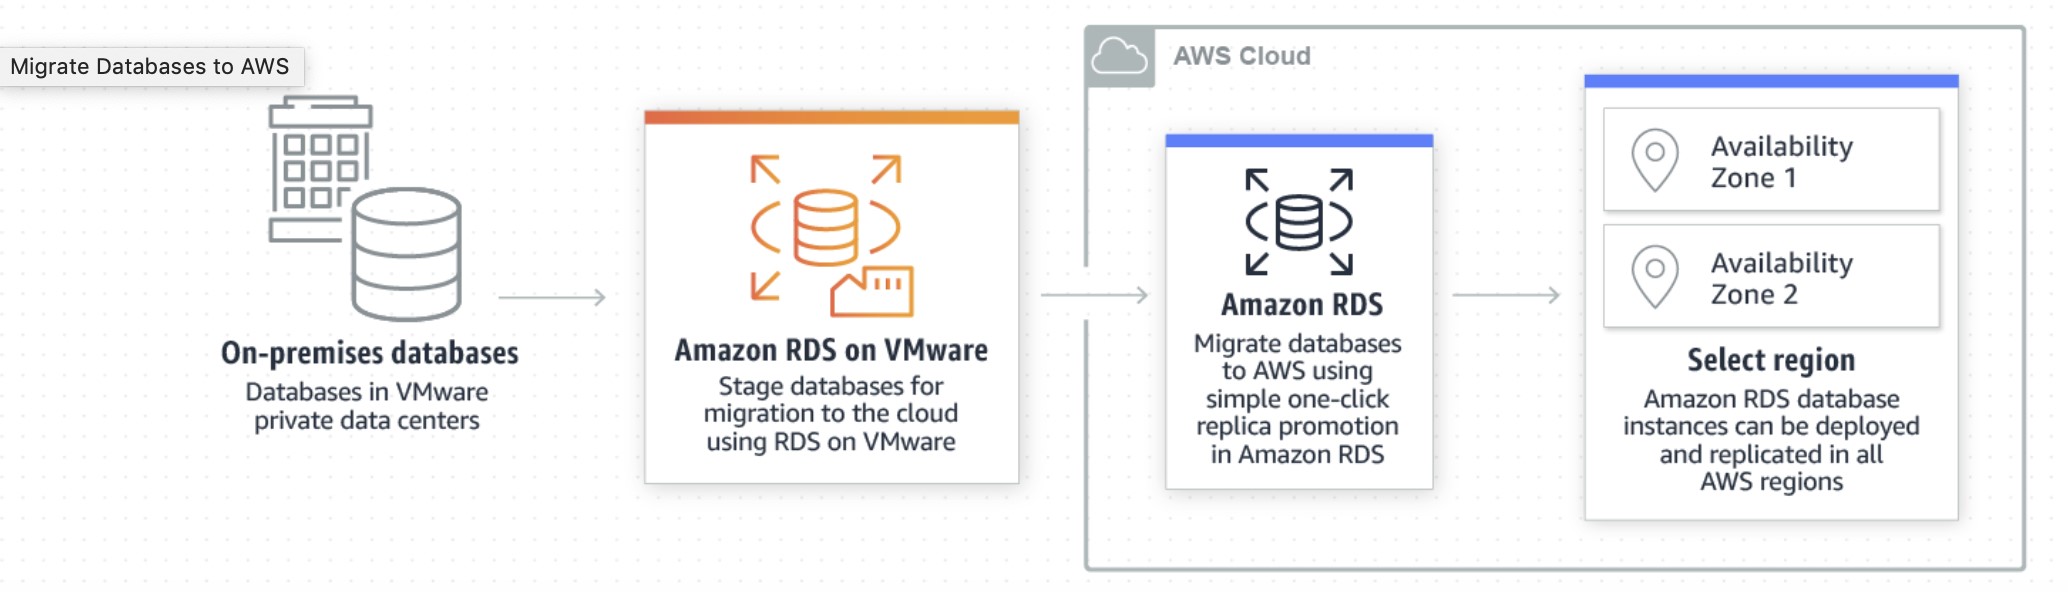 Migrate Databases to AWS fay AWS Cloud

[2 oo KR 74 K a ©) Zone 1
[BB or C = > 4 = >
“Nn ©) Availability
one Zz ada | > Amazon RDS > Zone 2
On-premises databases Amazon RDS on VMware Migrate databases Select region
: to AWS using )
Databases in VMware Stage databases for simple one-click Amazon RDS database
private data centers ene ee replica promotion instances can be deployed
using On Ewell’ in Amazon RDS and replicated in all
AWS regions